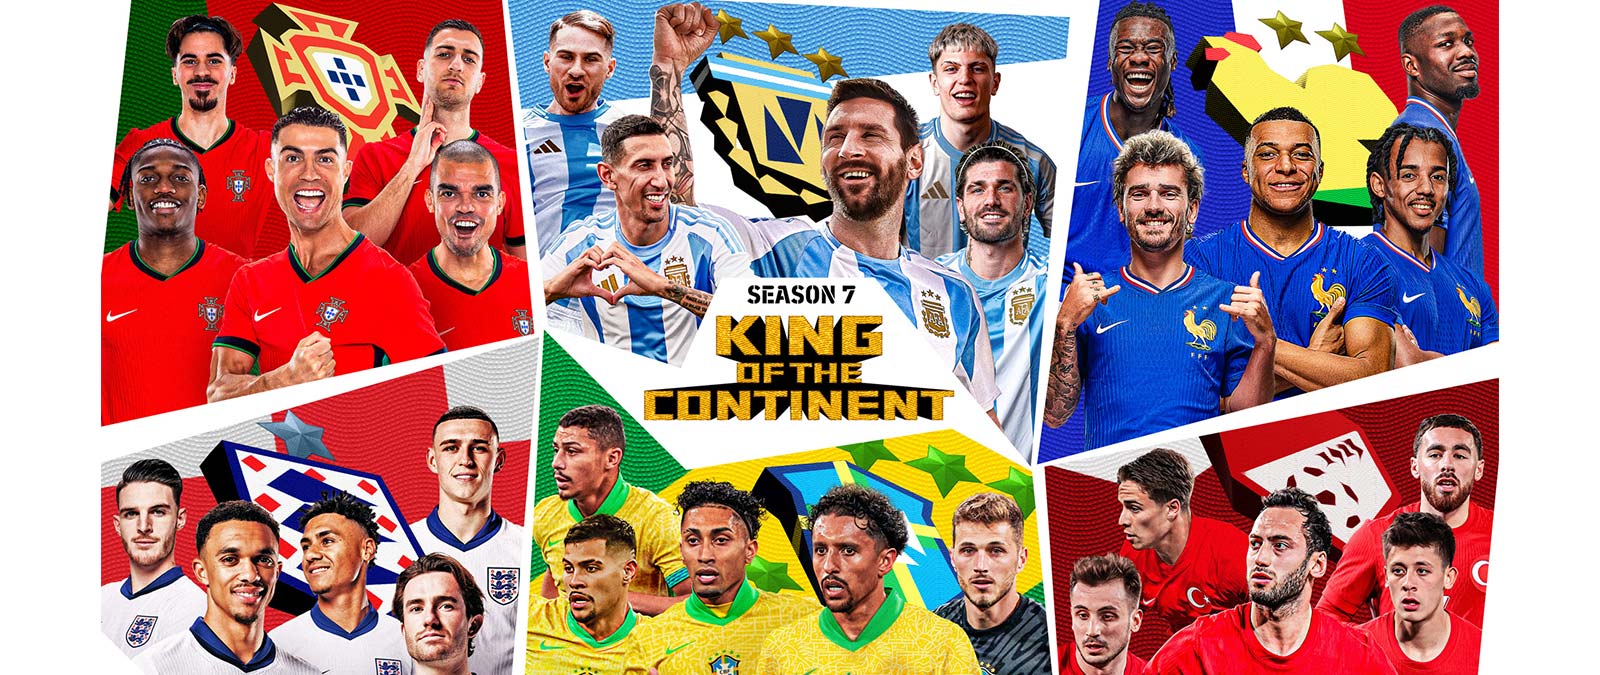 Season 7, King of the Continent, collage of Portugal, Argentina, France, England, Brazil, and Turkey national football teams.